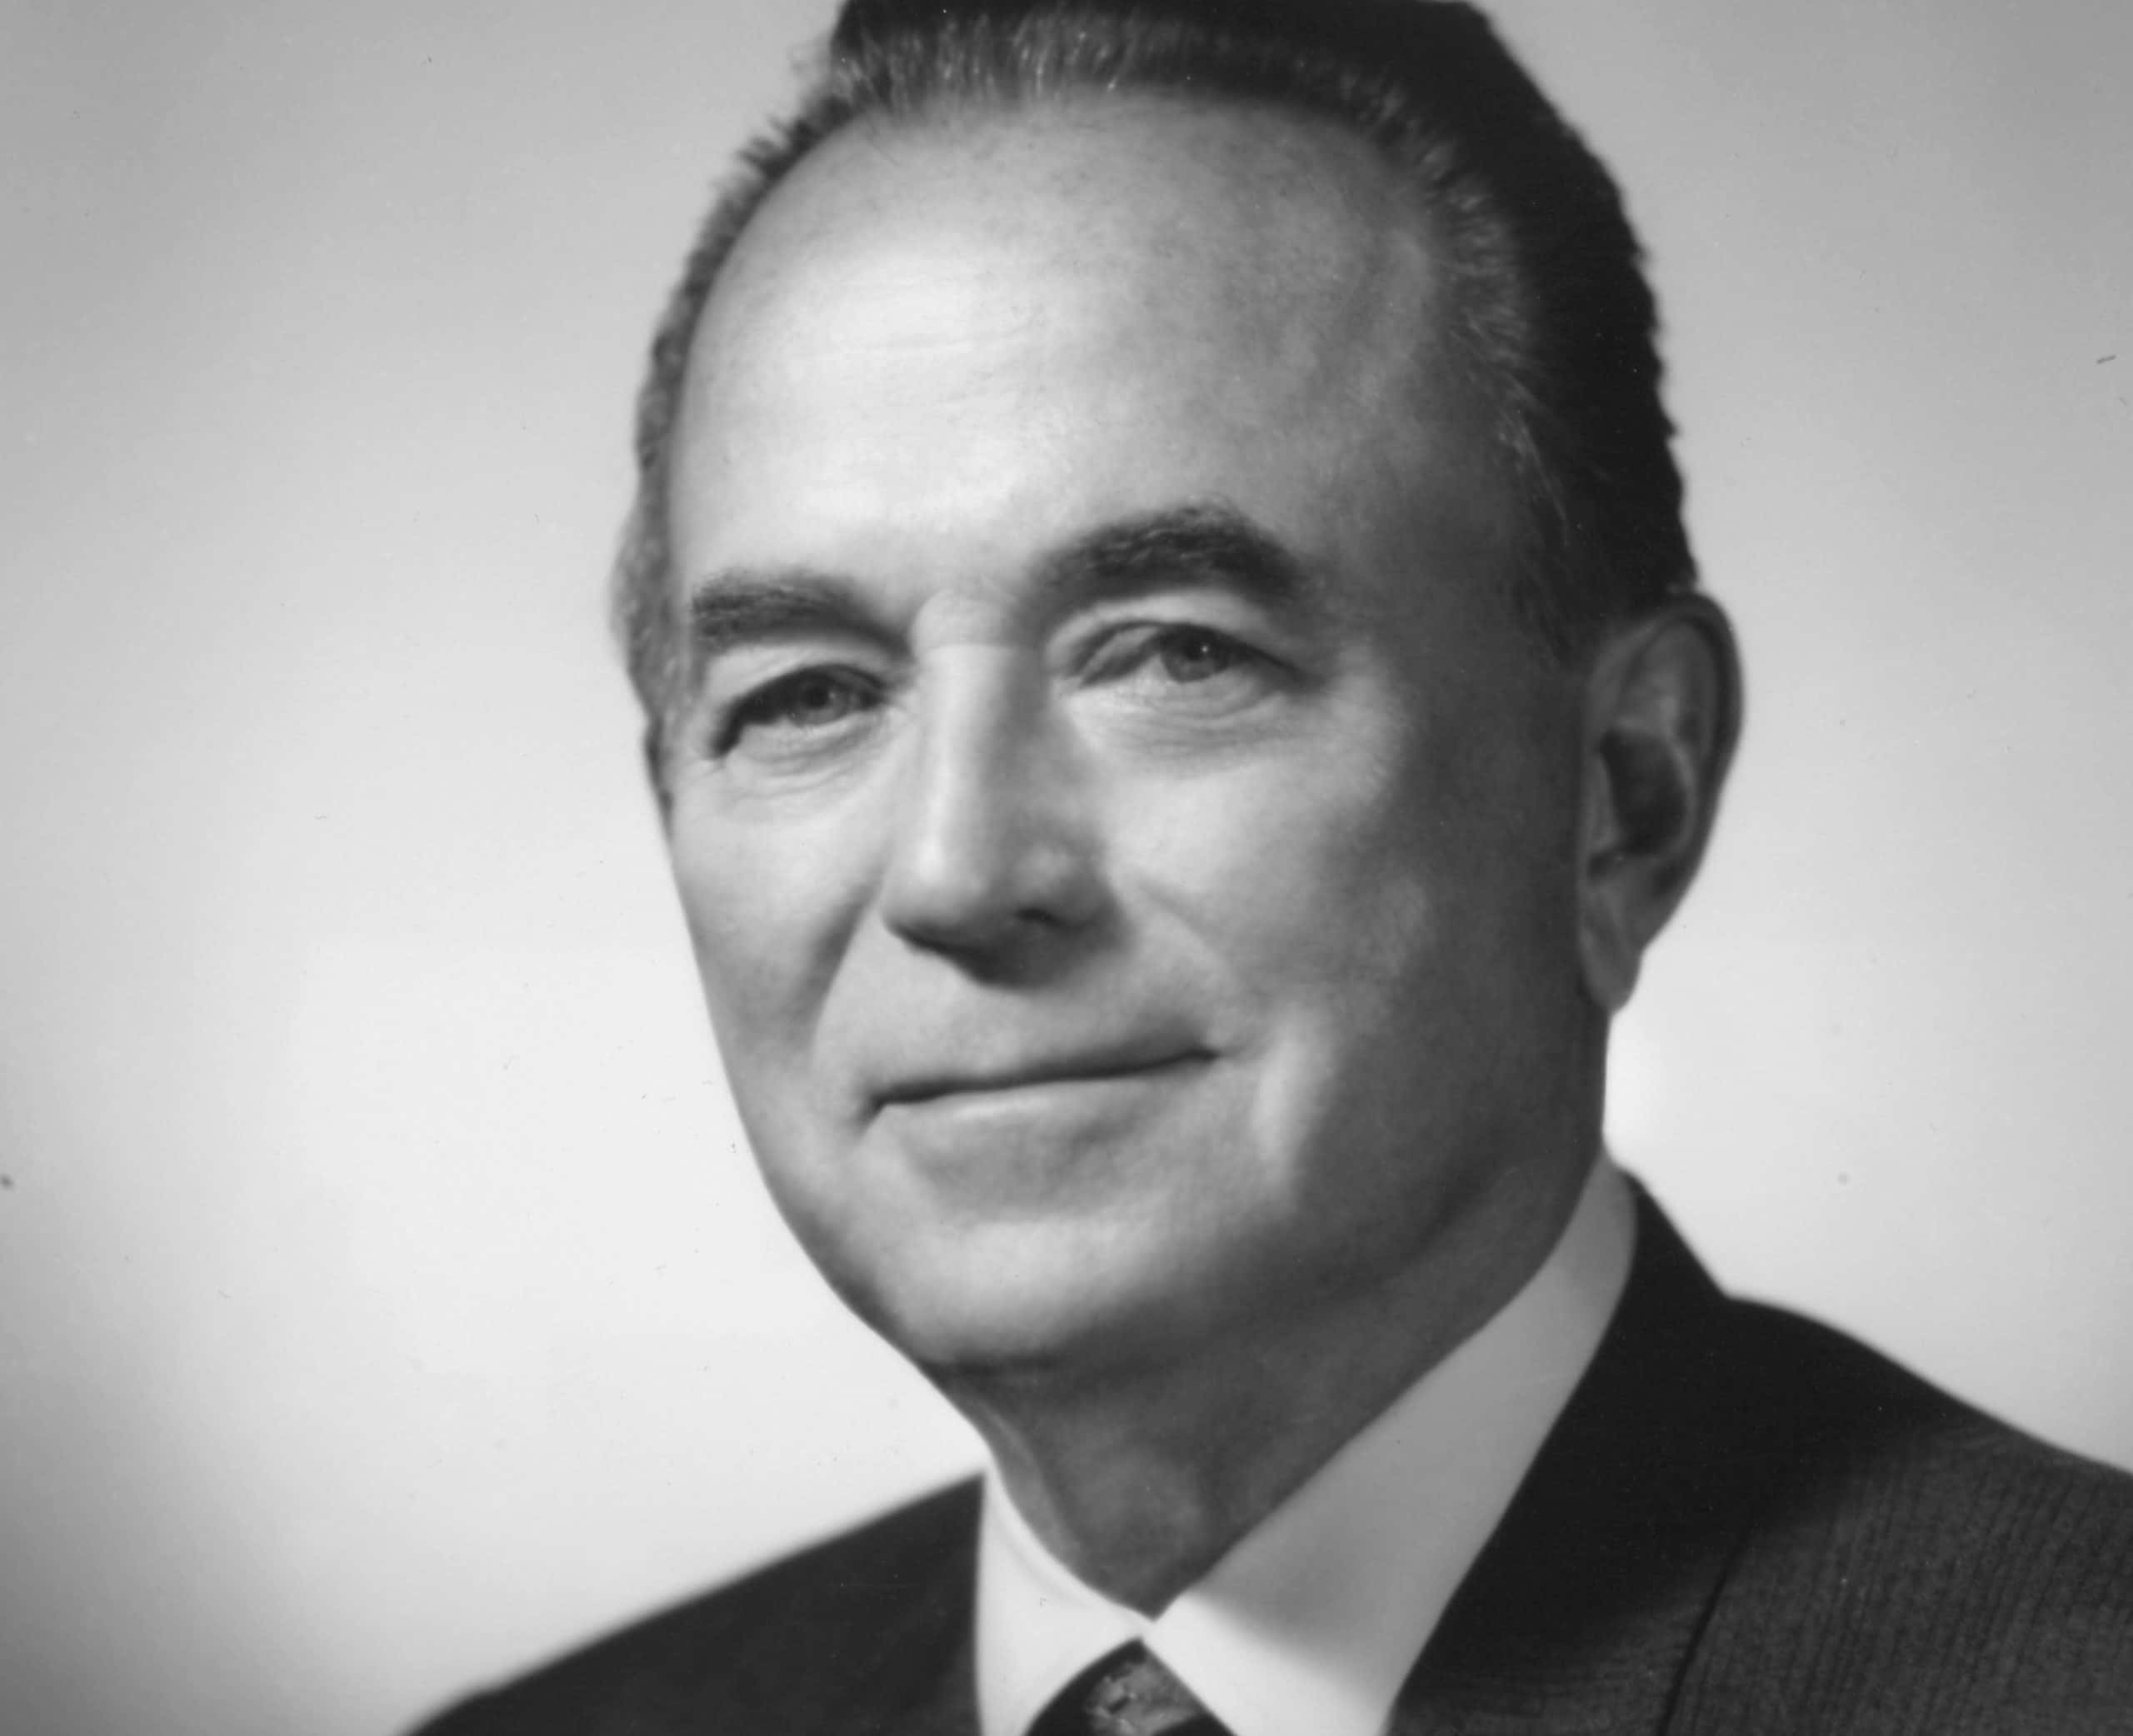 Ray Kroc Facts